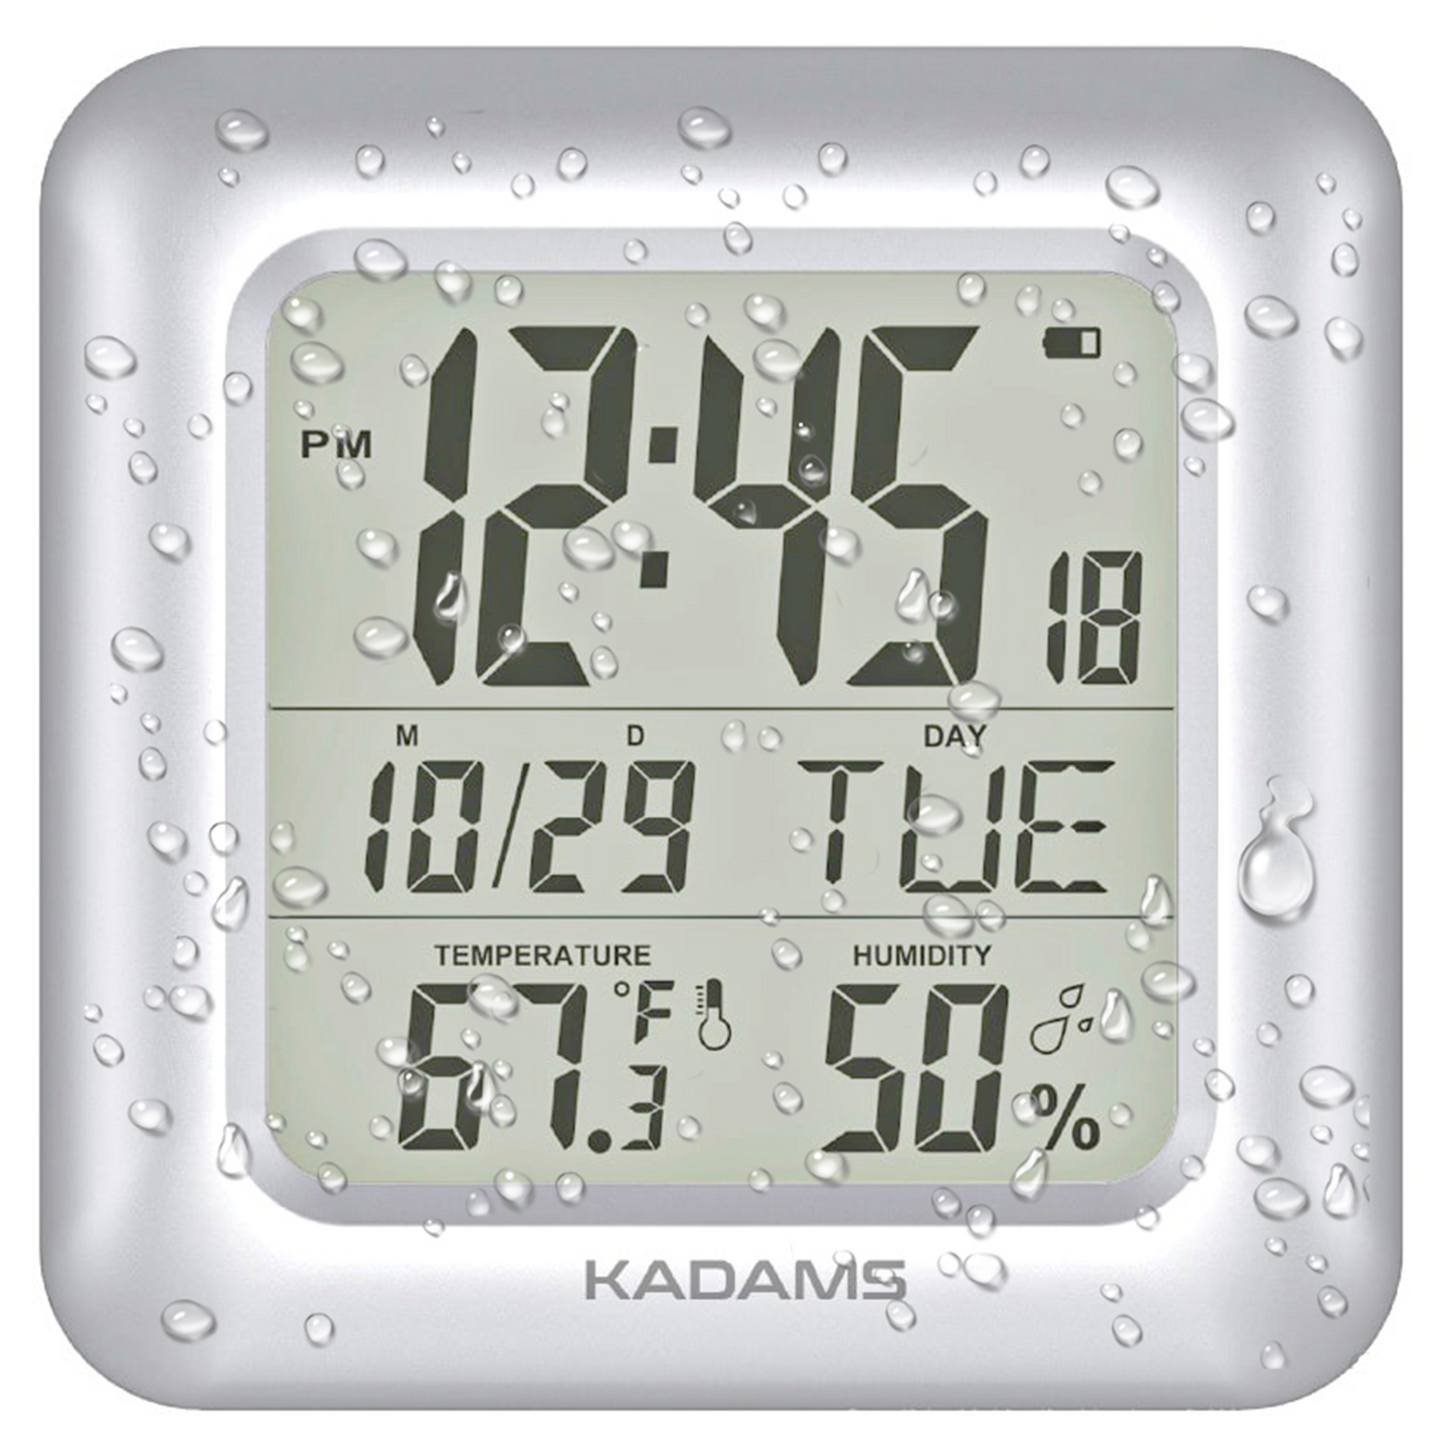 Kadams Bathroom Digital Clock with Large LCD Screen - Shower Wall Clock with Timer - Water Resistant - Temperature & Humidity Display - Calendar Display - 4 Mounting Options (Silver)